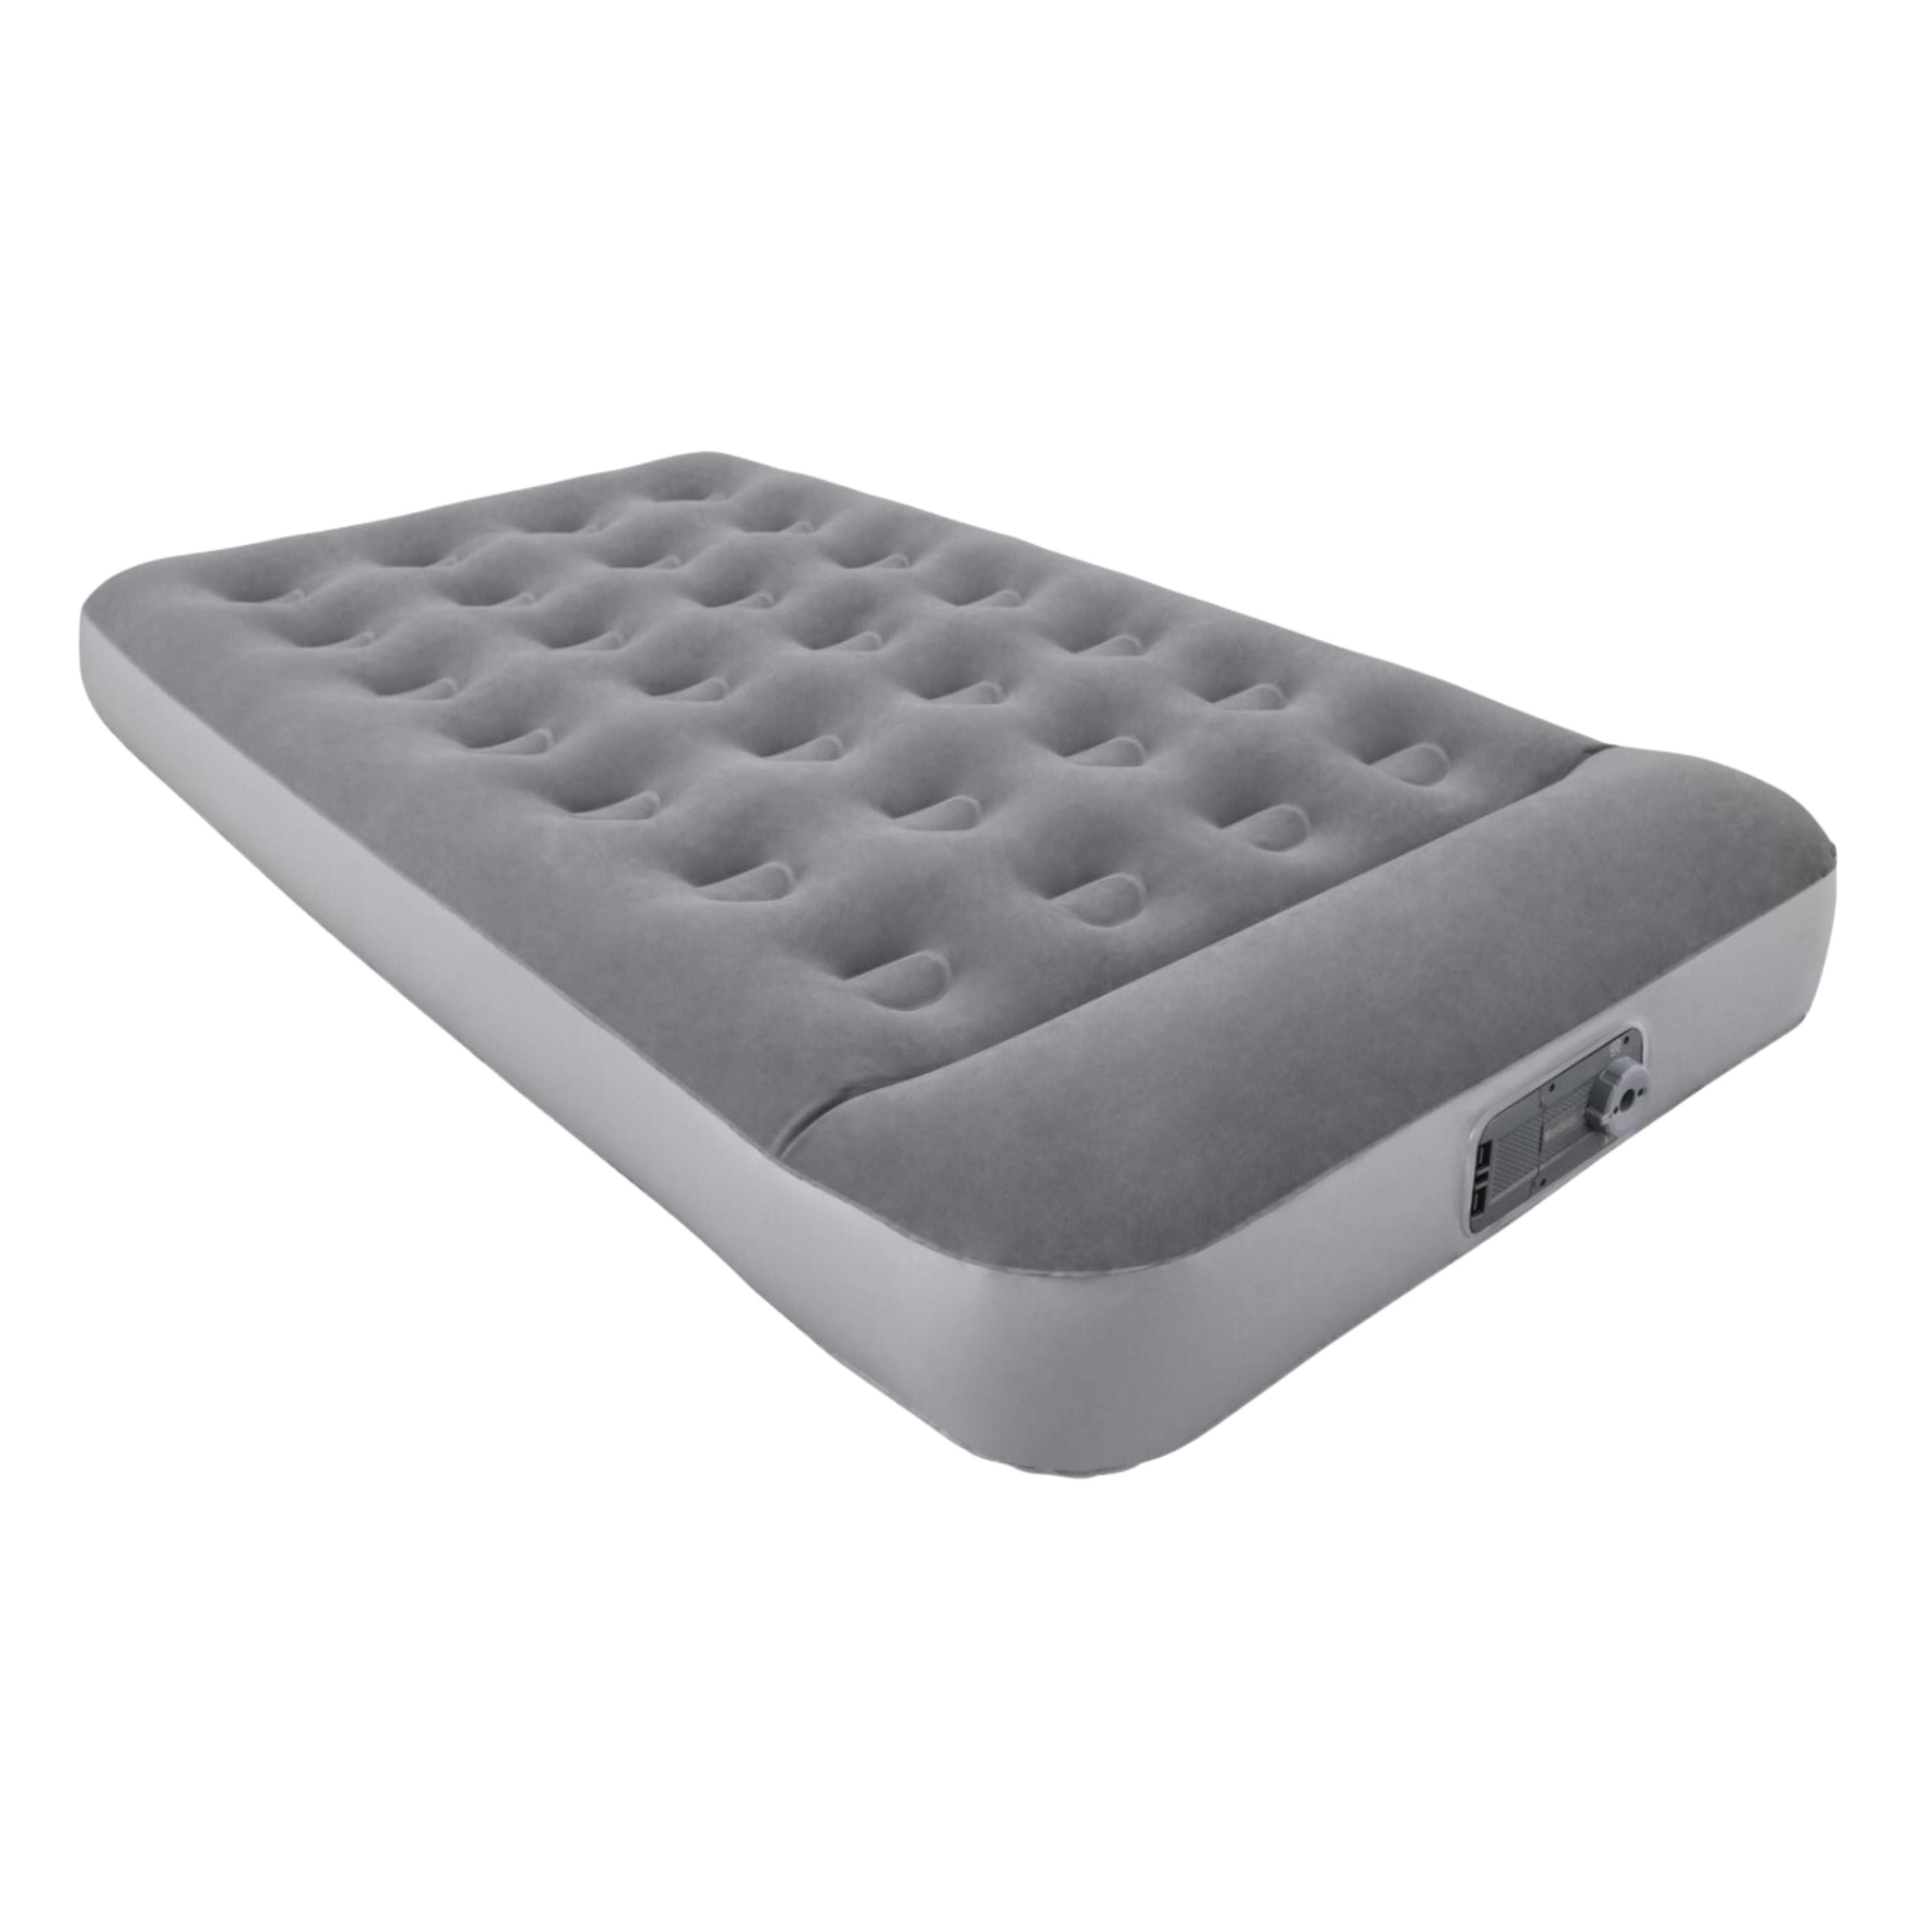 Air bed with built-in pump - 74 x 39 in